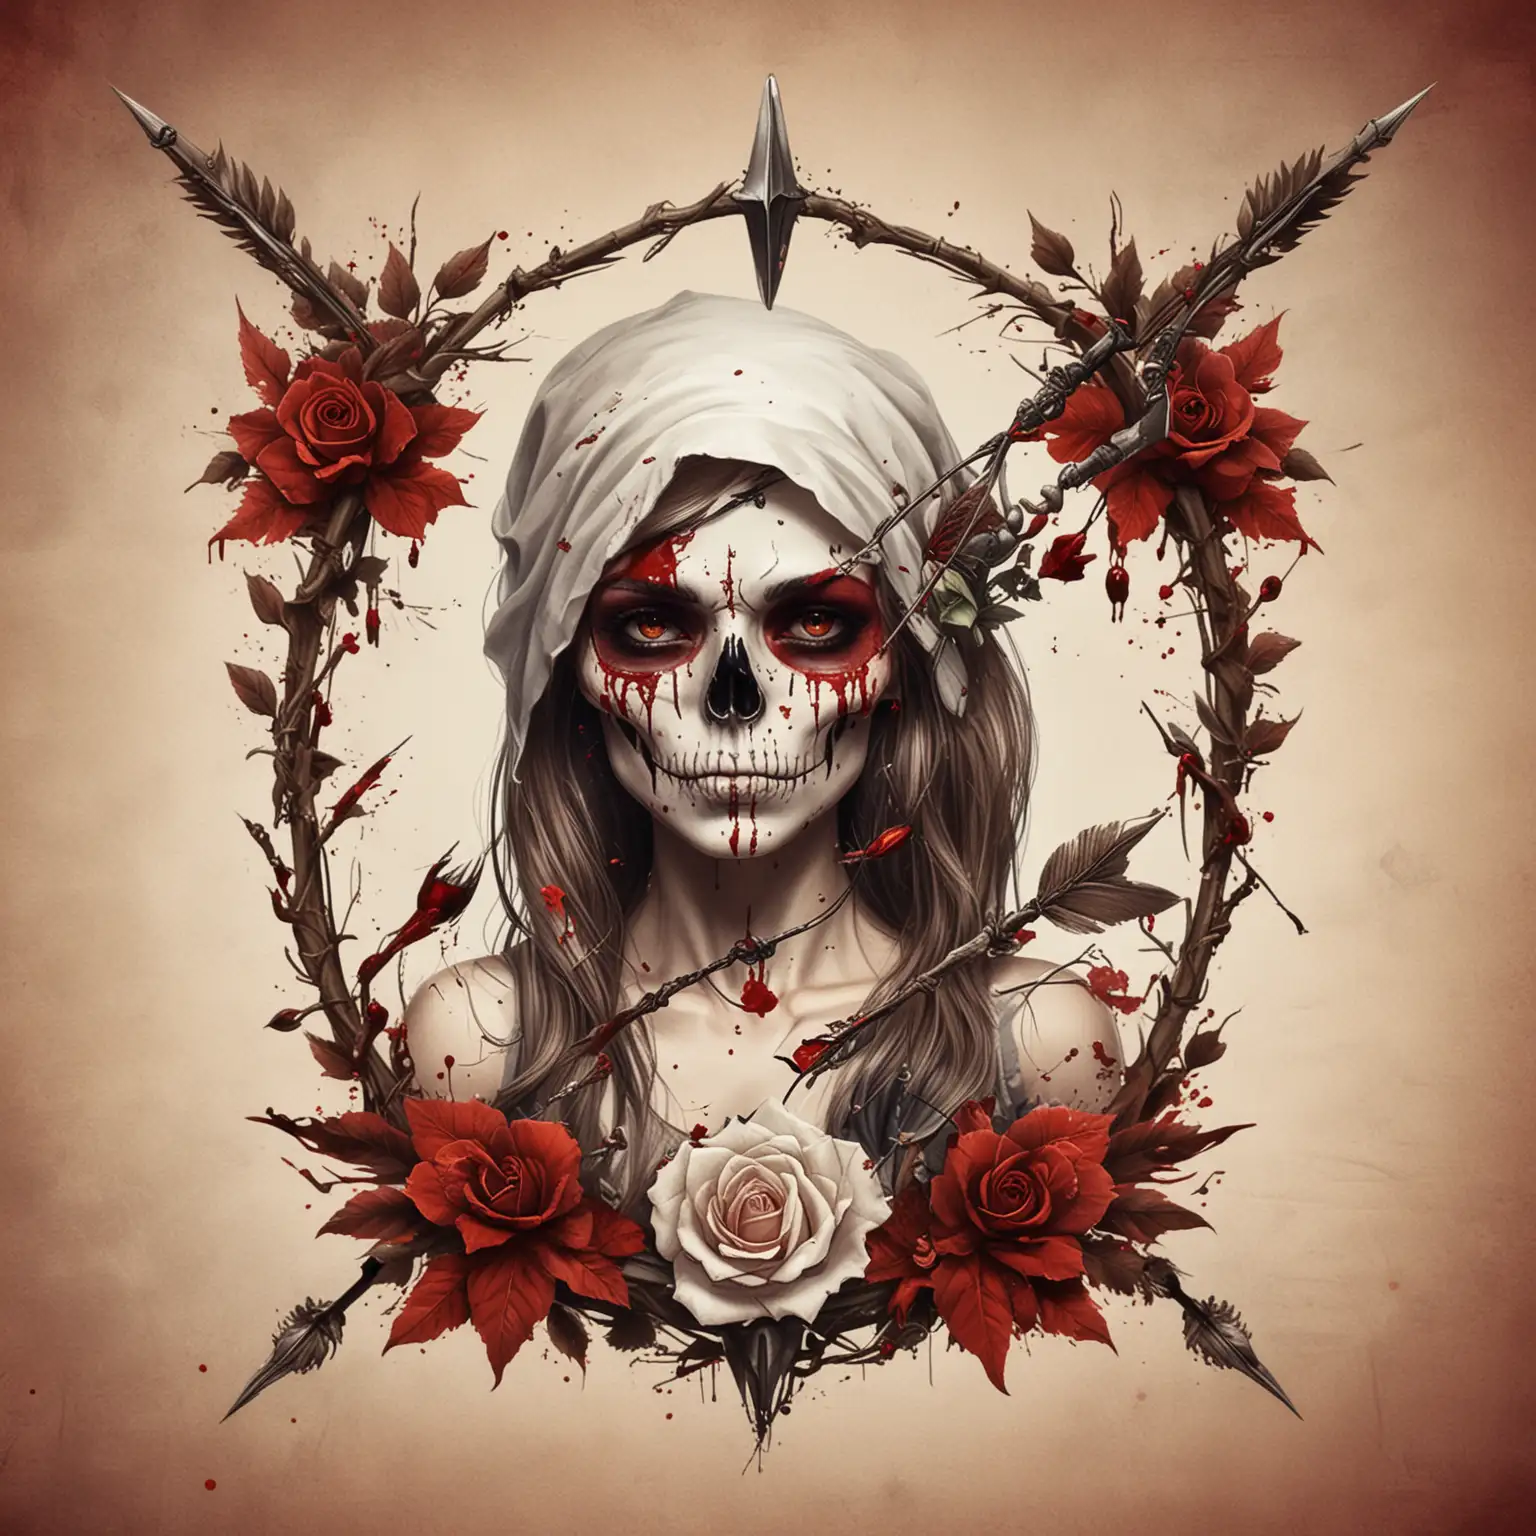 create a logo for a company called savage romance , include a hunting arrow and female skull and a whimsical pretty white rose and bloody thorns, red leaves. make it edgy with a nod to femininity and embrace the way a woman feels as a warrior when her husband is gone. 